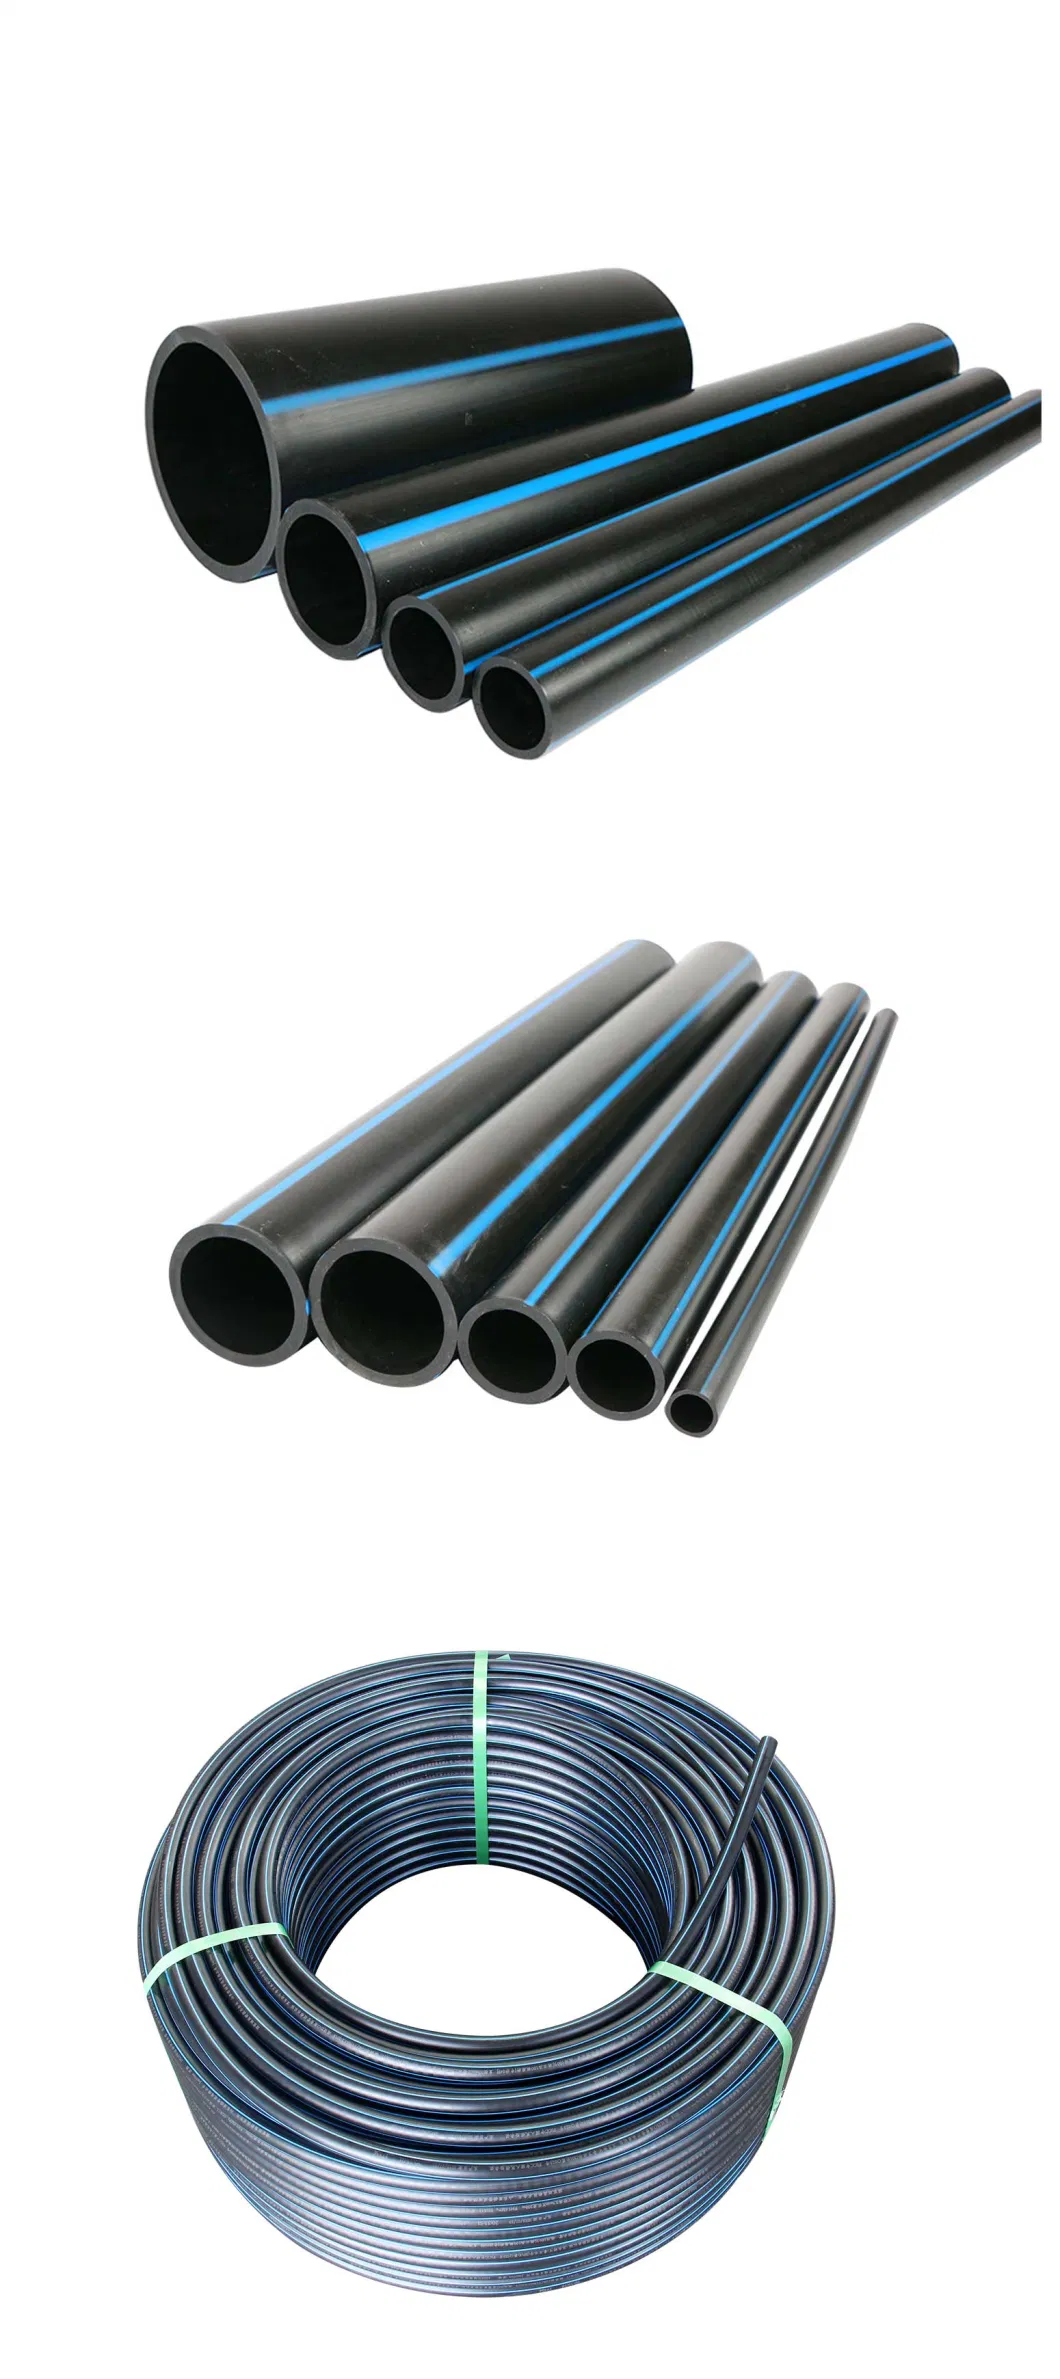 2021 The Latest Attractive Price Black HDPE Pipe Water Supply HDPE Pipe with Melt Socket Connection Butt and Fused Connection Low Construction Cost